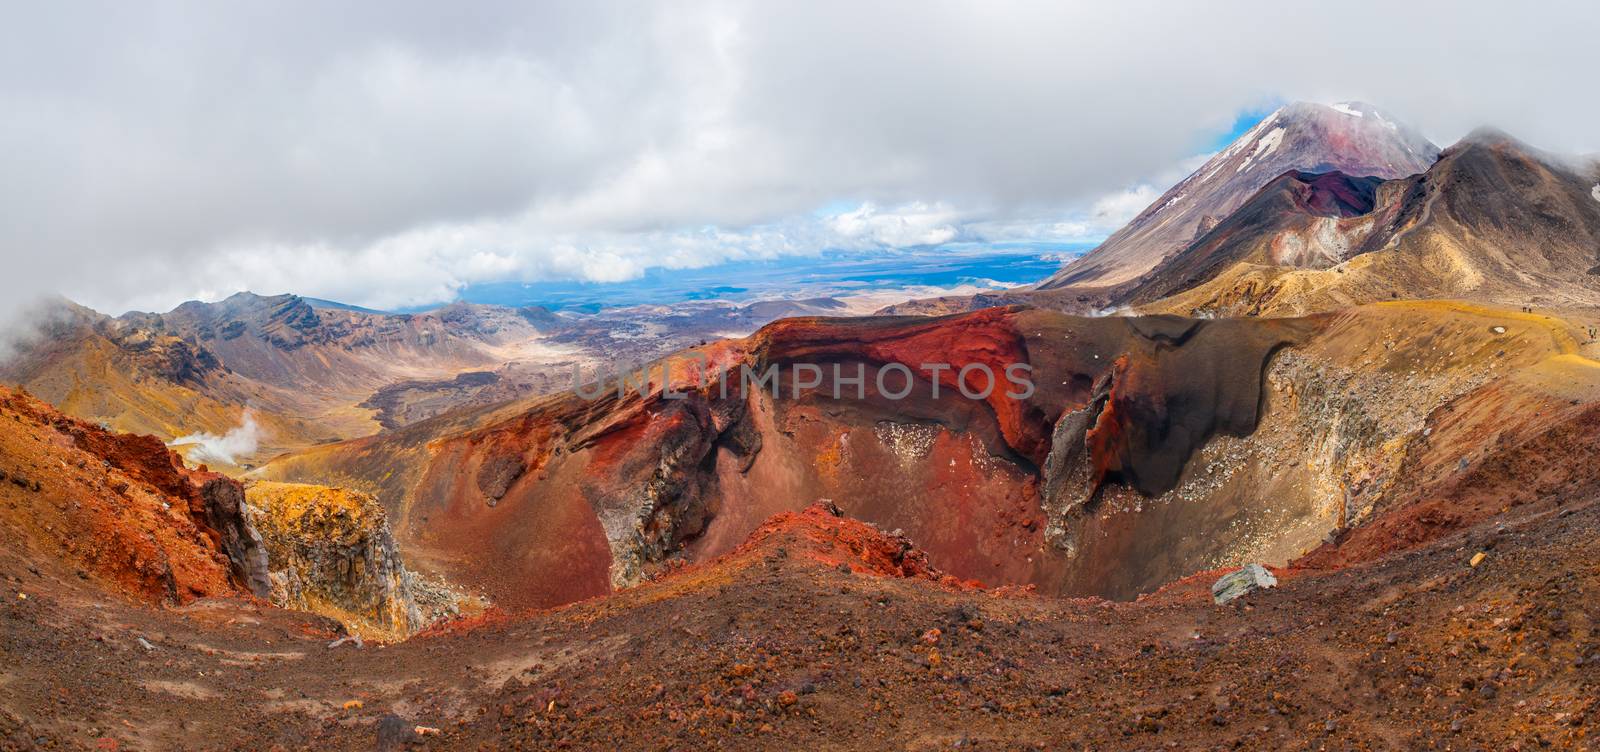 Panoramic photo of the Red Crater on the top of Tongariro Volcano with a Mount Ngauruhoe in the back, Tongariro Crossing National Park - New Zealand